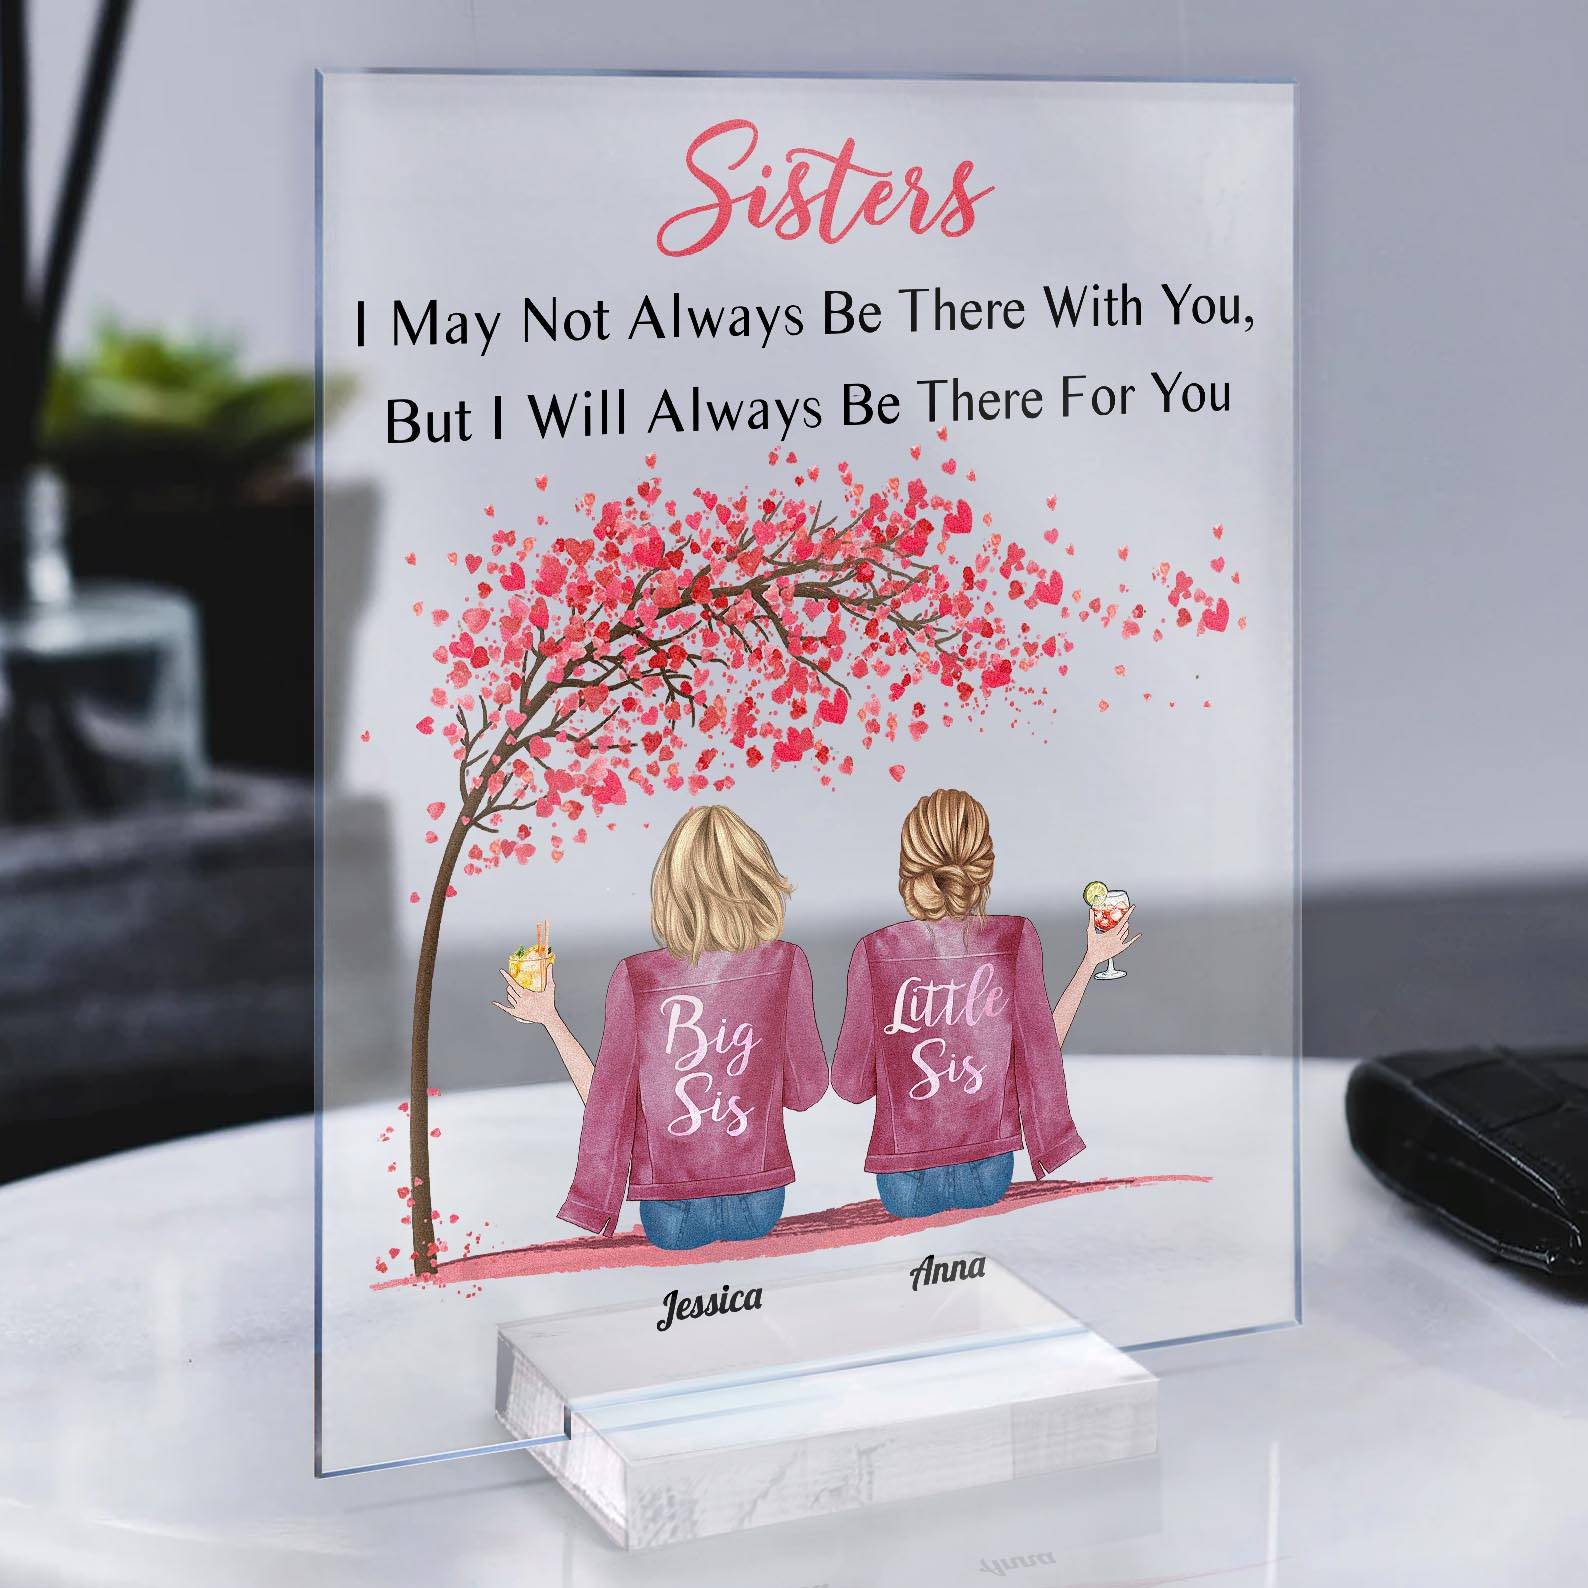 Personalized Photo Frame Rakhi Gift for Brother | Rakhi Gift for sister |  Rakhi Gift hamper | Rakshabandhan Gifts (Sister frame) : Amazon.in: Home &  Kitchen